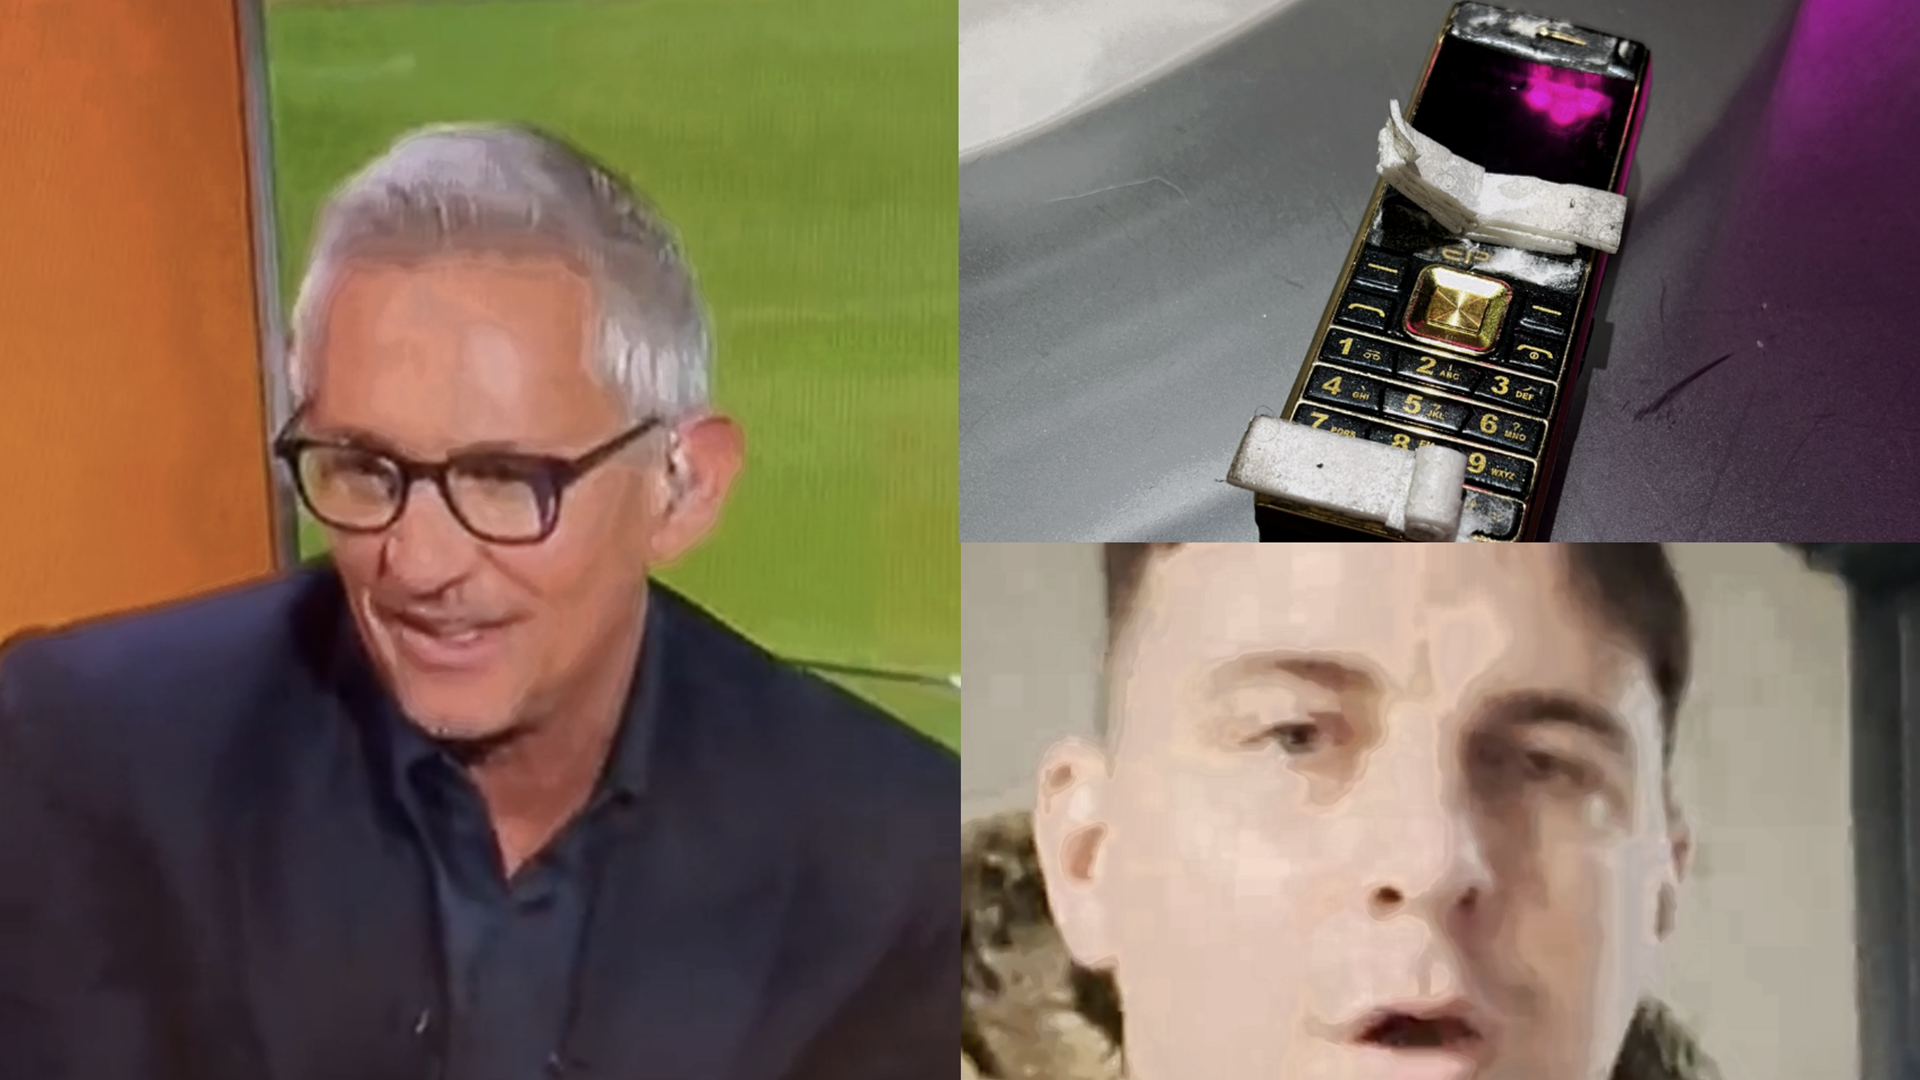 BBC sex-noise culprit revealed! Notorious prankster claims responsibility for broadcasting porn audio on live TV before Liverpool FA Cup match Goal UK pic